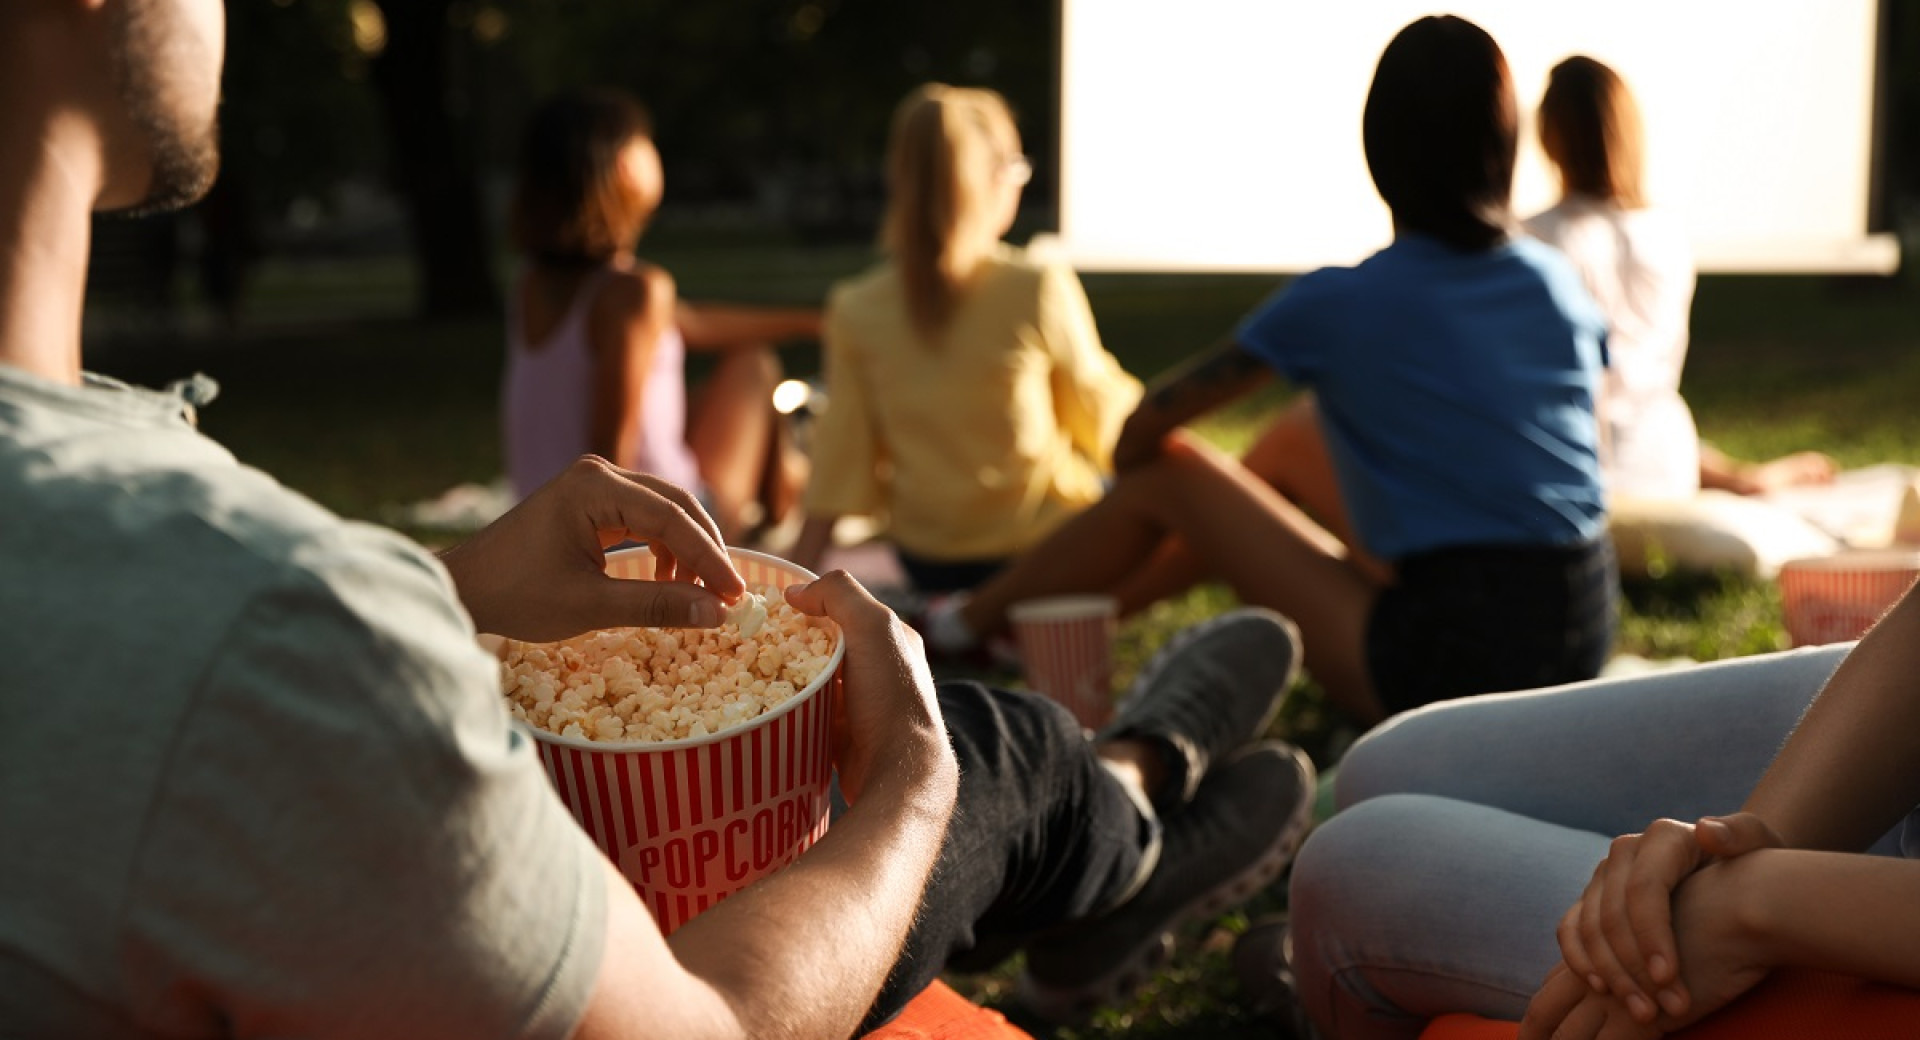 A group of people sitting on the lawn and watching a movie.